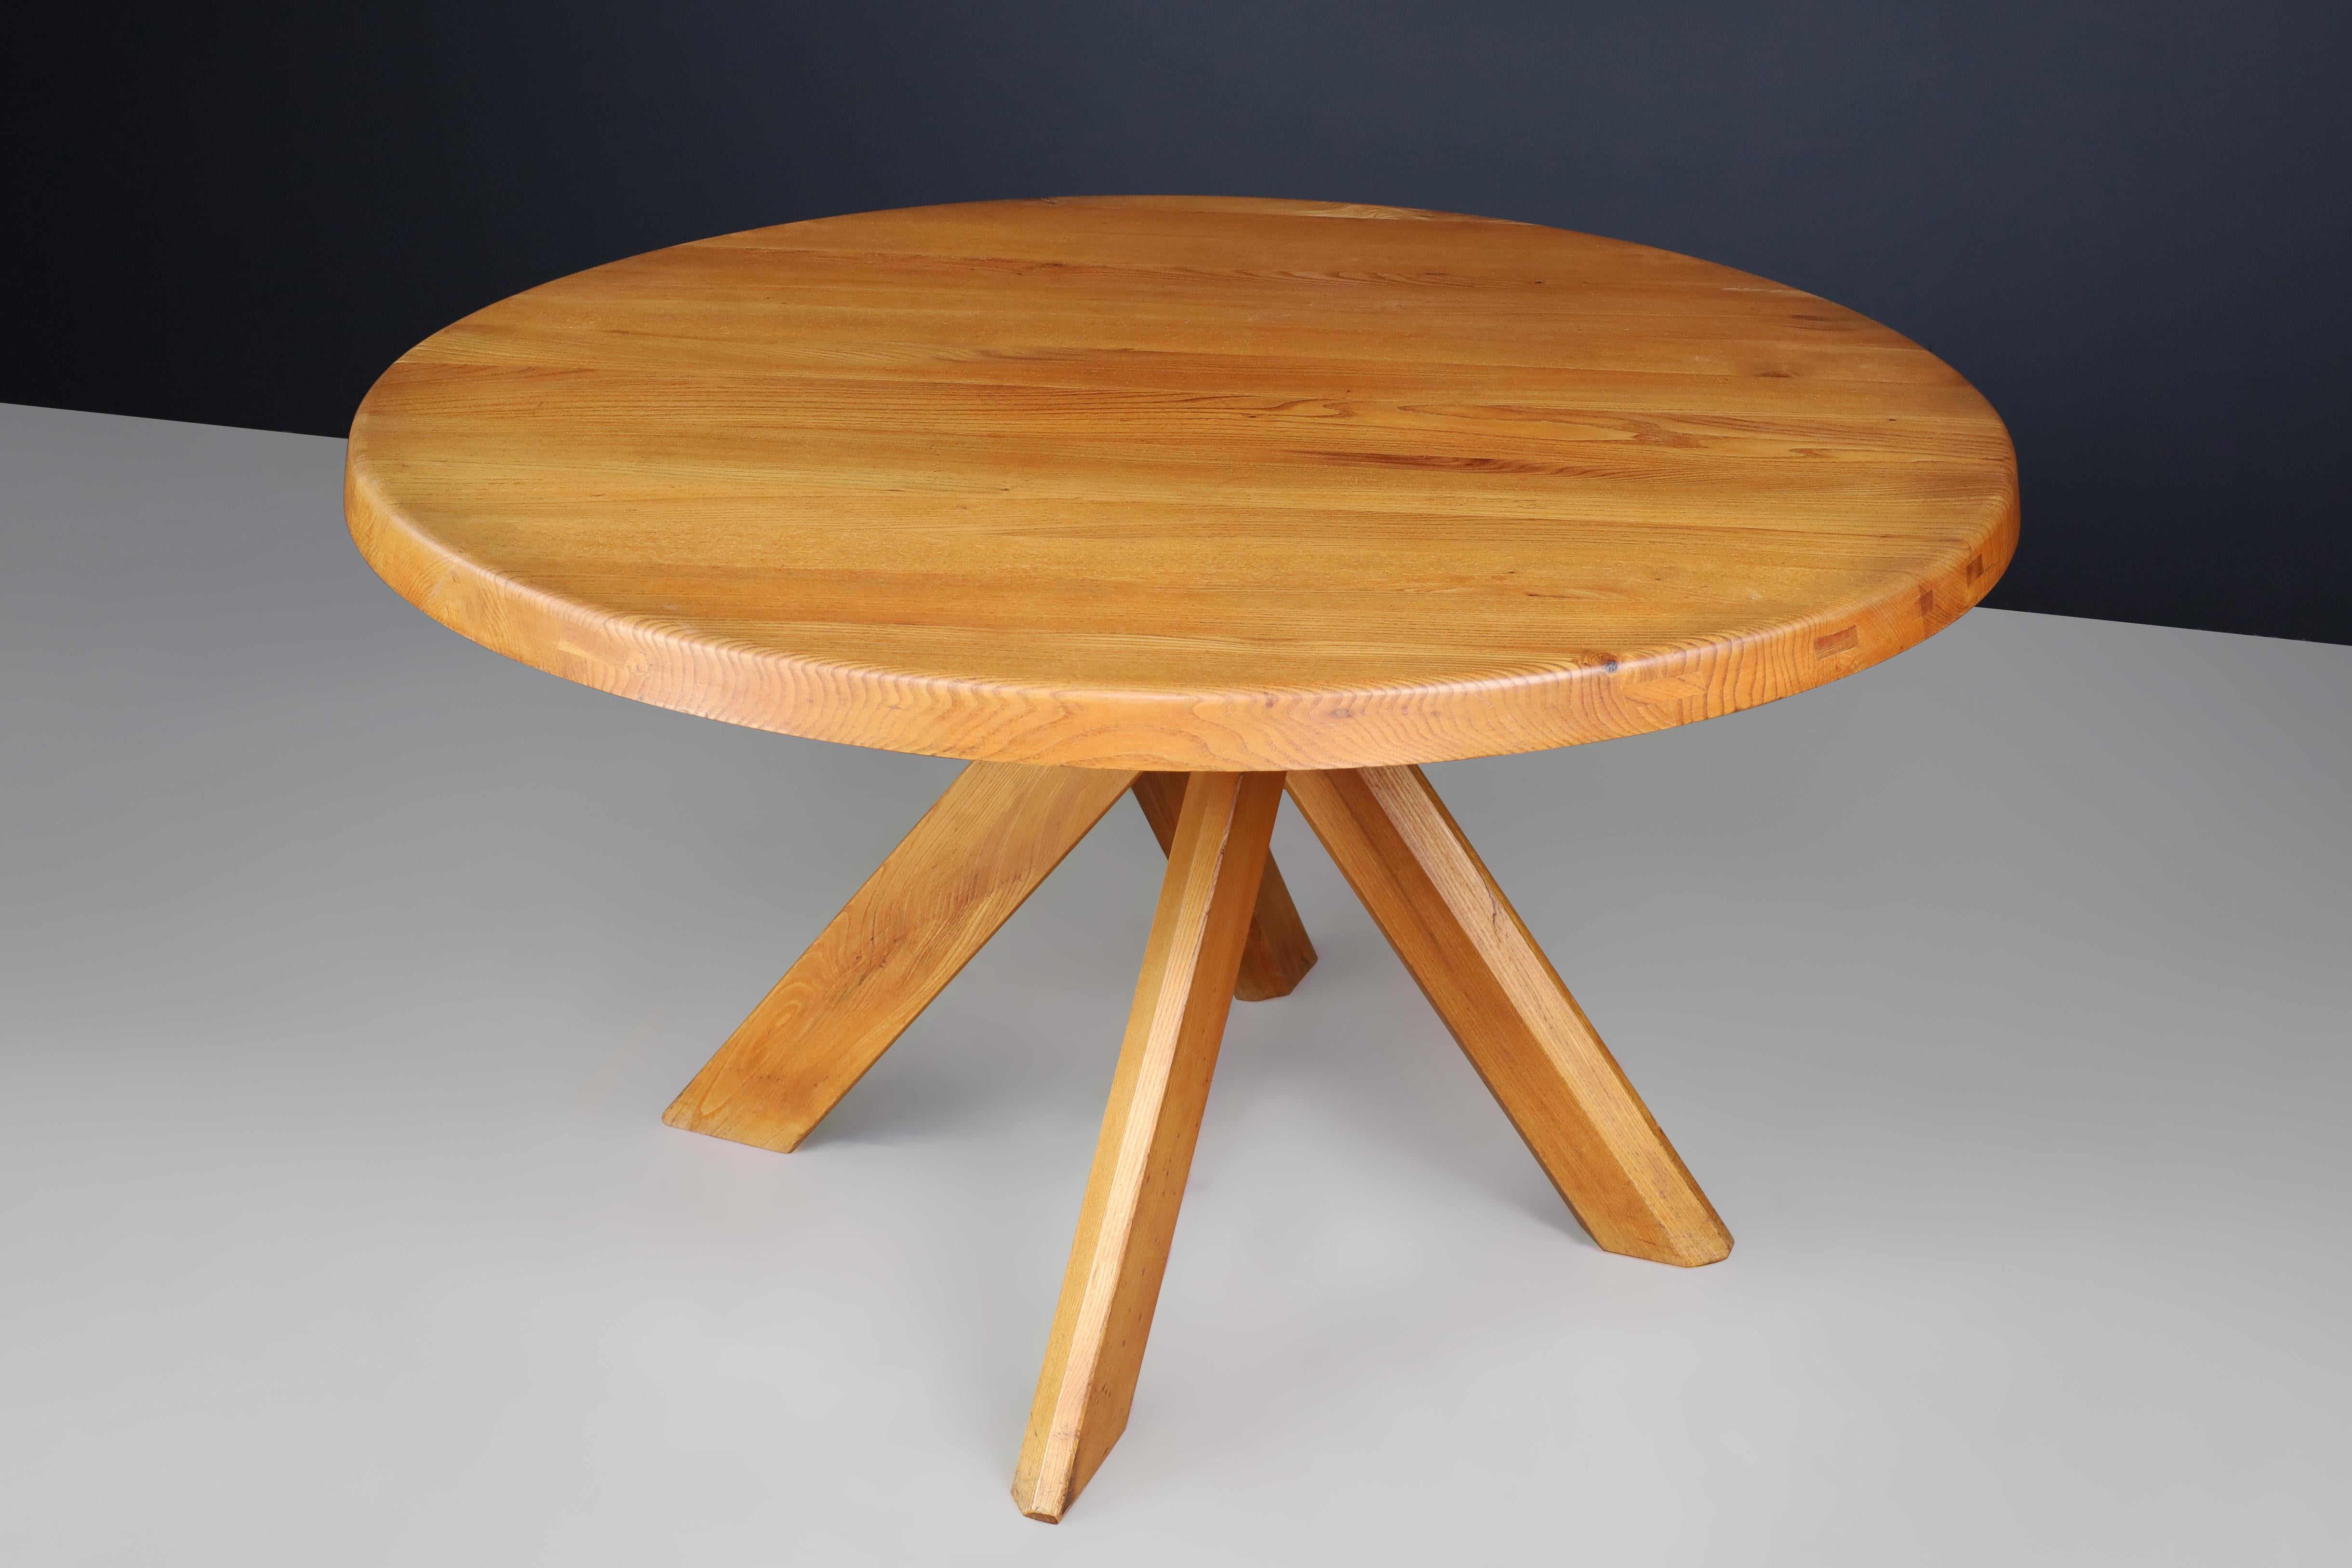 Pierre Chapo 'T21C' Sfax Round Dining Table made of Solid Elm, France 1969 For Sale 6